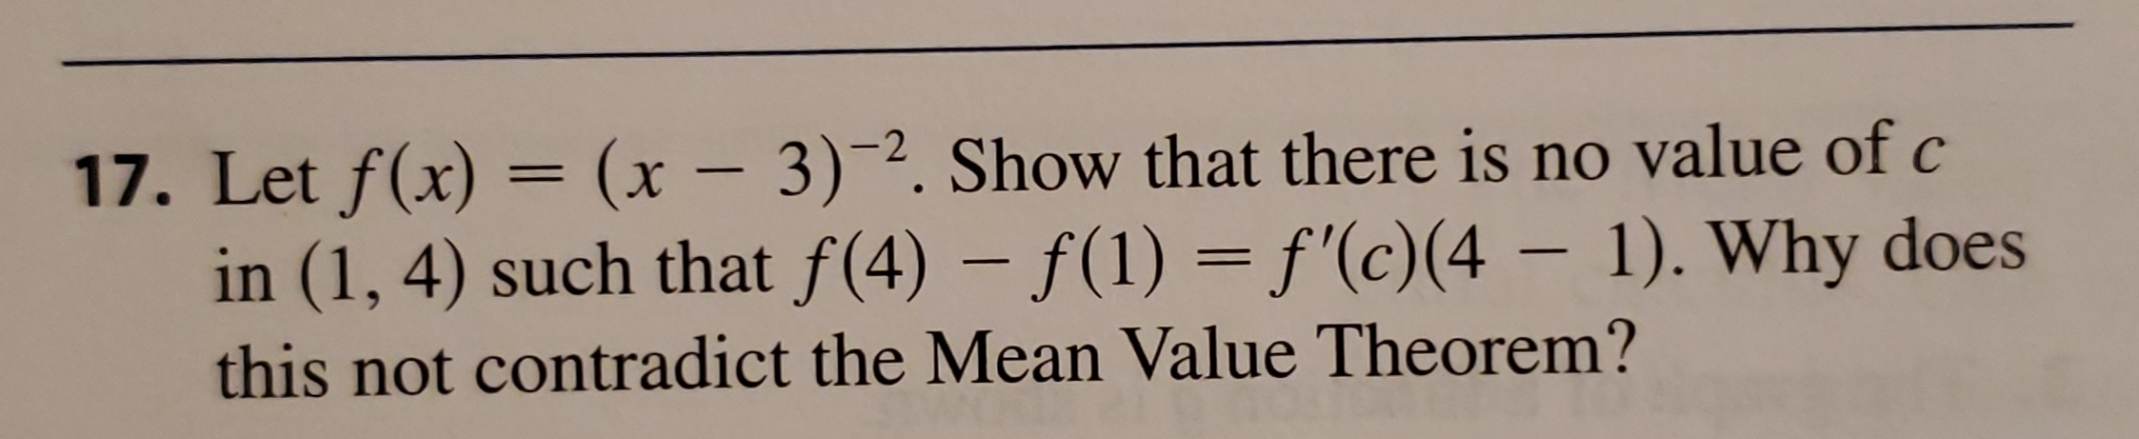 17. Let f(x) = (x - 3)-2. Show that there is no value of c
in (1, 4) such that f(4) - f(1) f'(c)(4 - 1). Why does
this not contradict the Mean Value Theorem?
